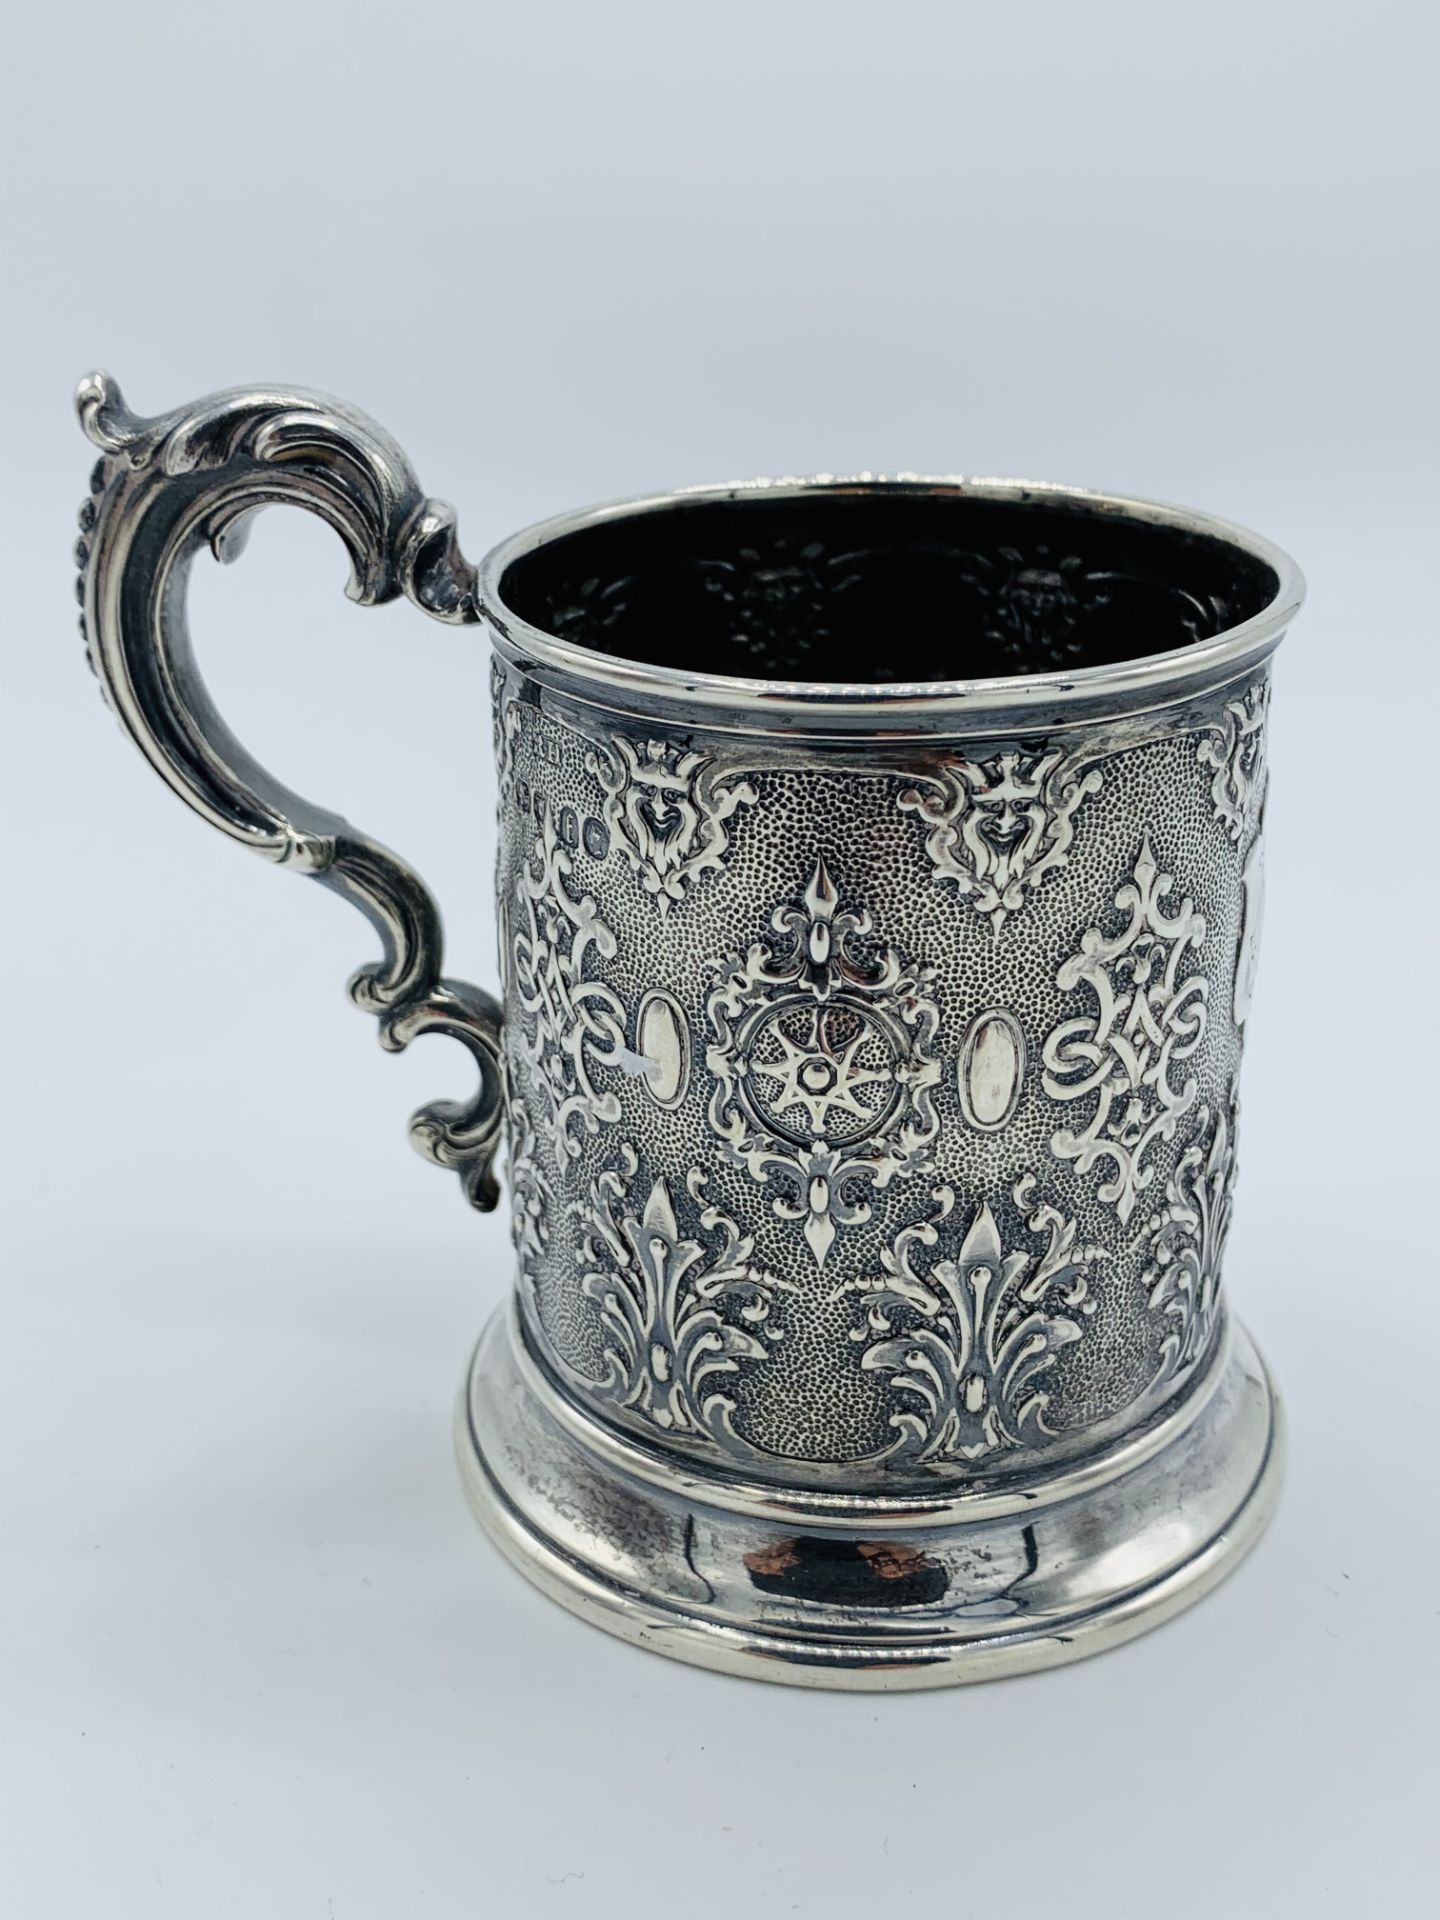 Small heavily repousse decorated silver tankard by Robert Hennell III